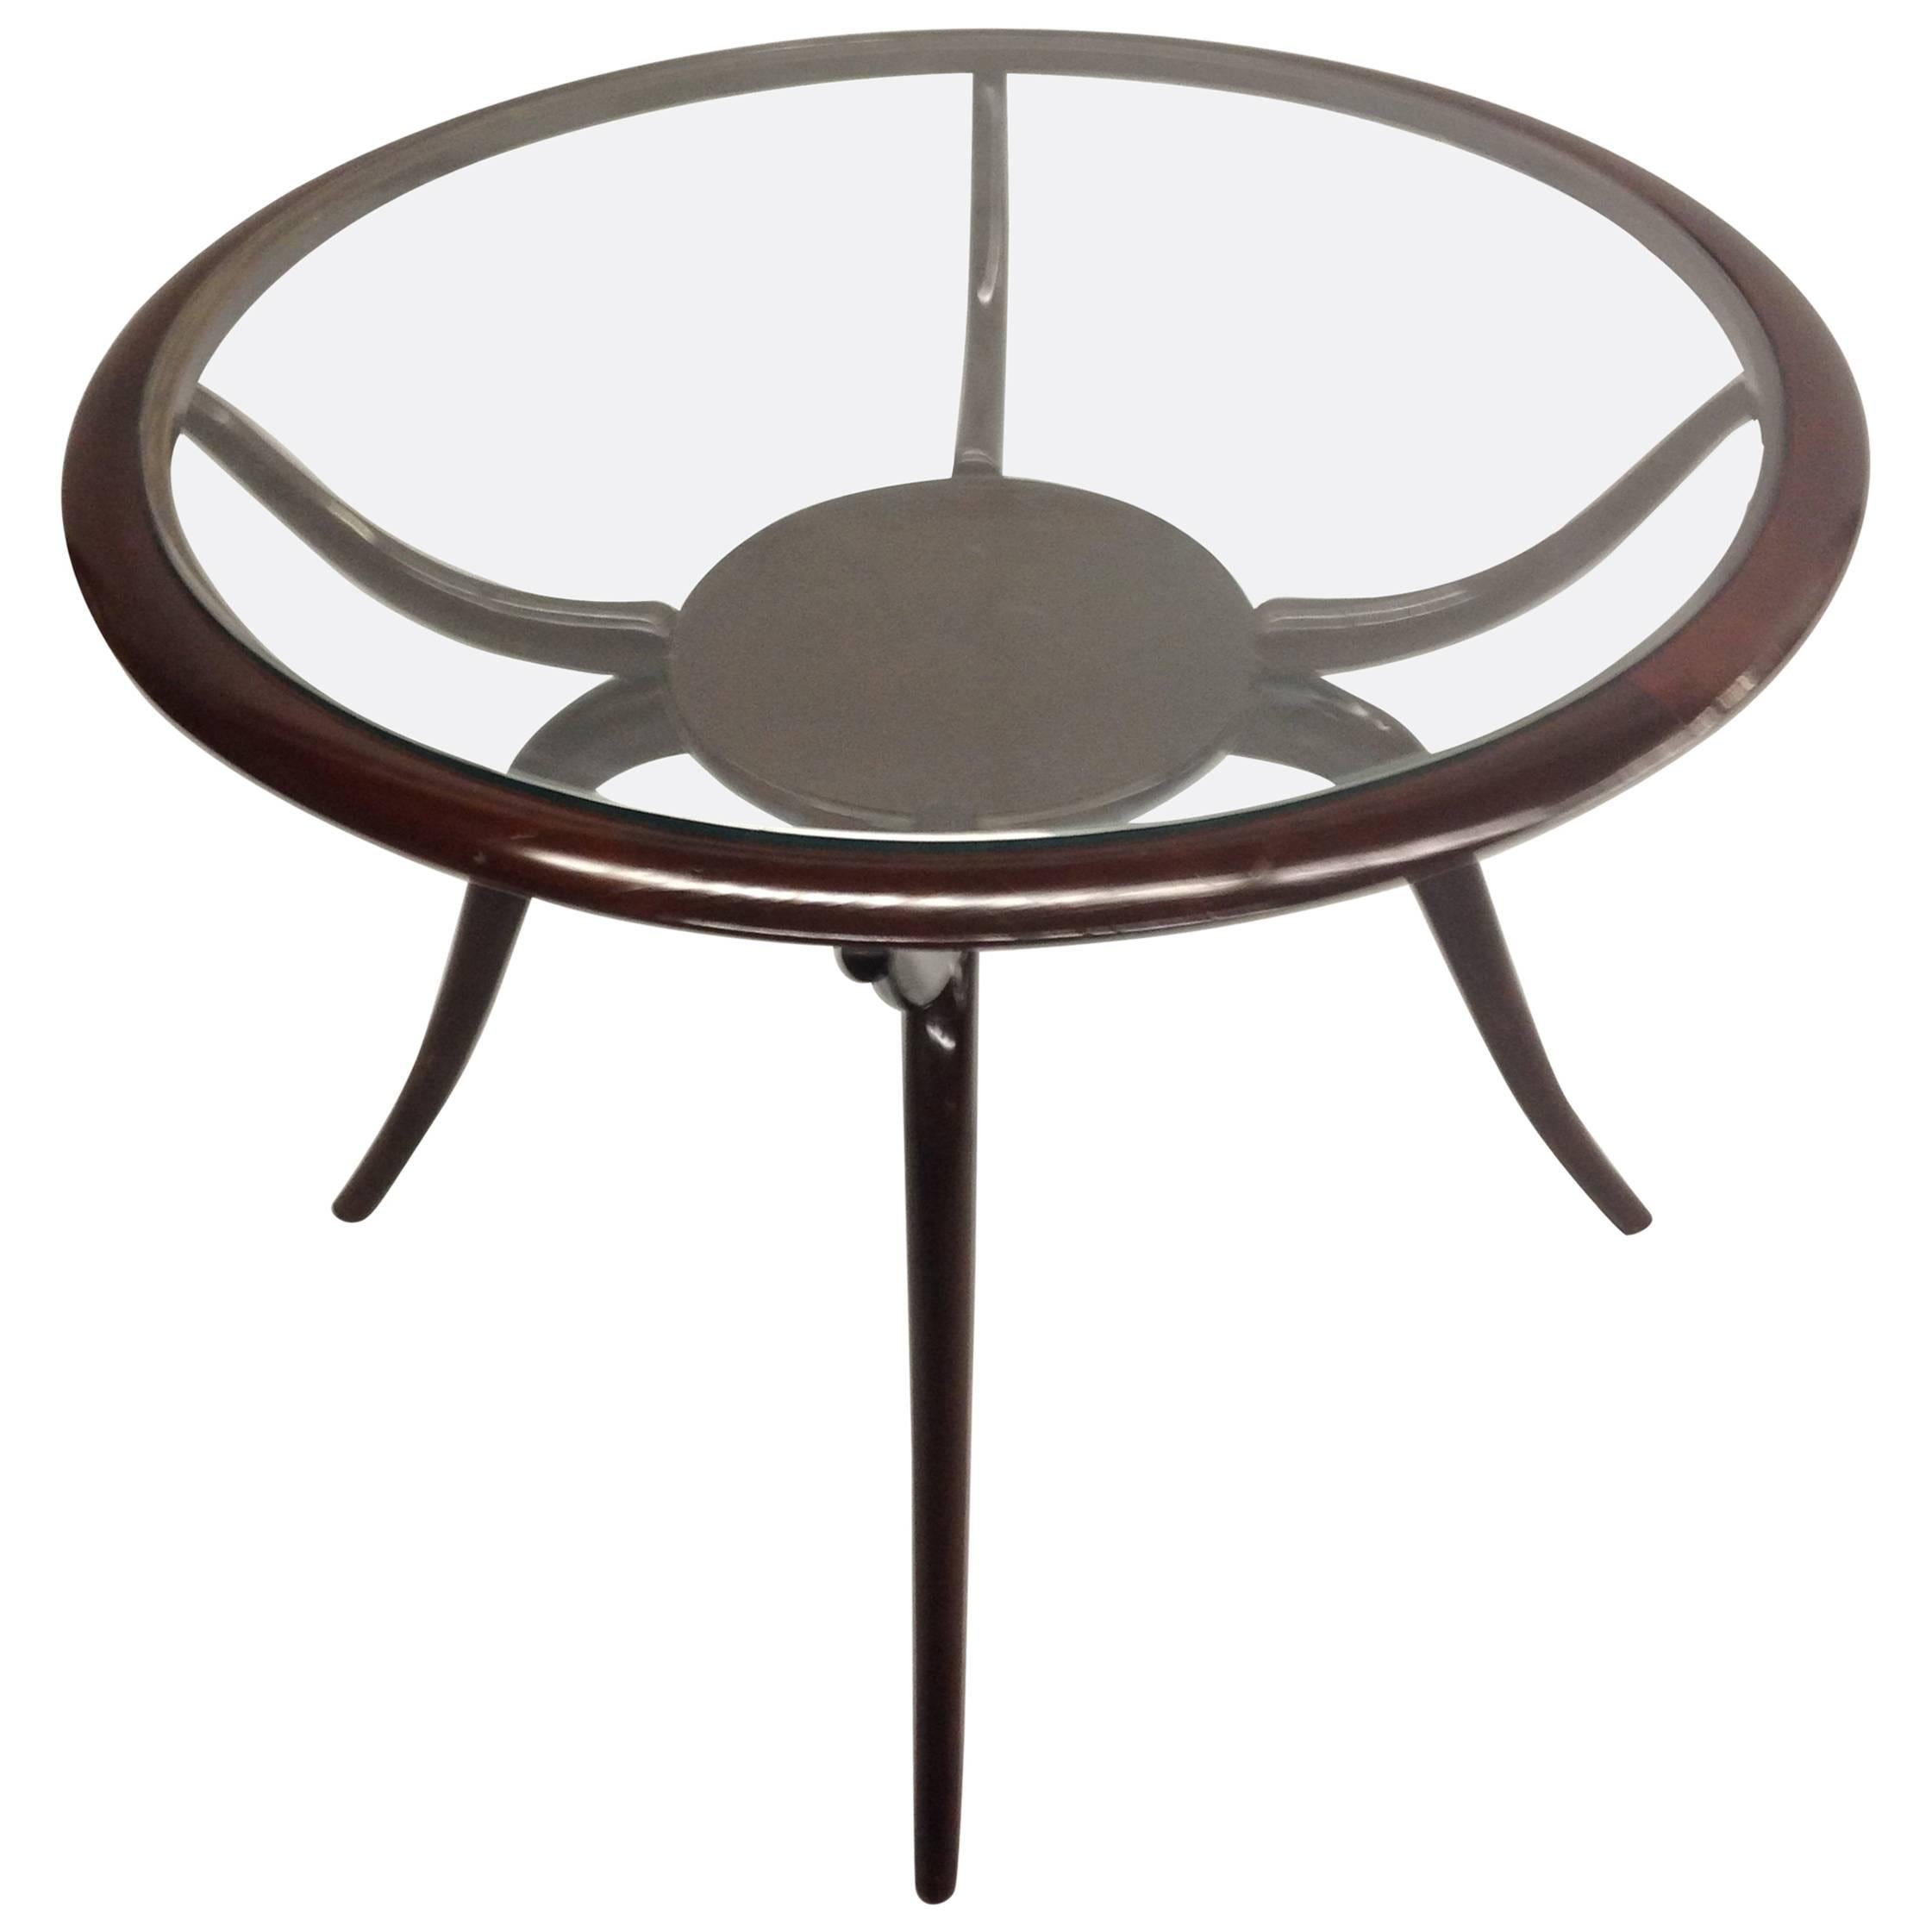 Elegant Italian midcentury arachnid / spider form cocktail table or side table or gueridon by Guglielmo Ulrich. 

Ulrich's work was influenced by Art Deco and a Sober Modern neoclassicism, both of which are seen in this delicate, sensuous piece.